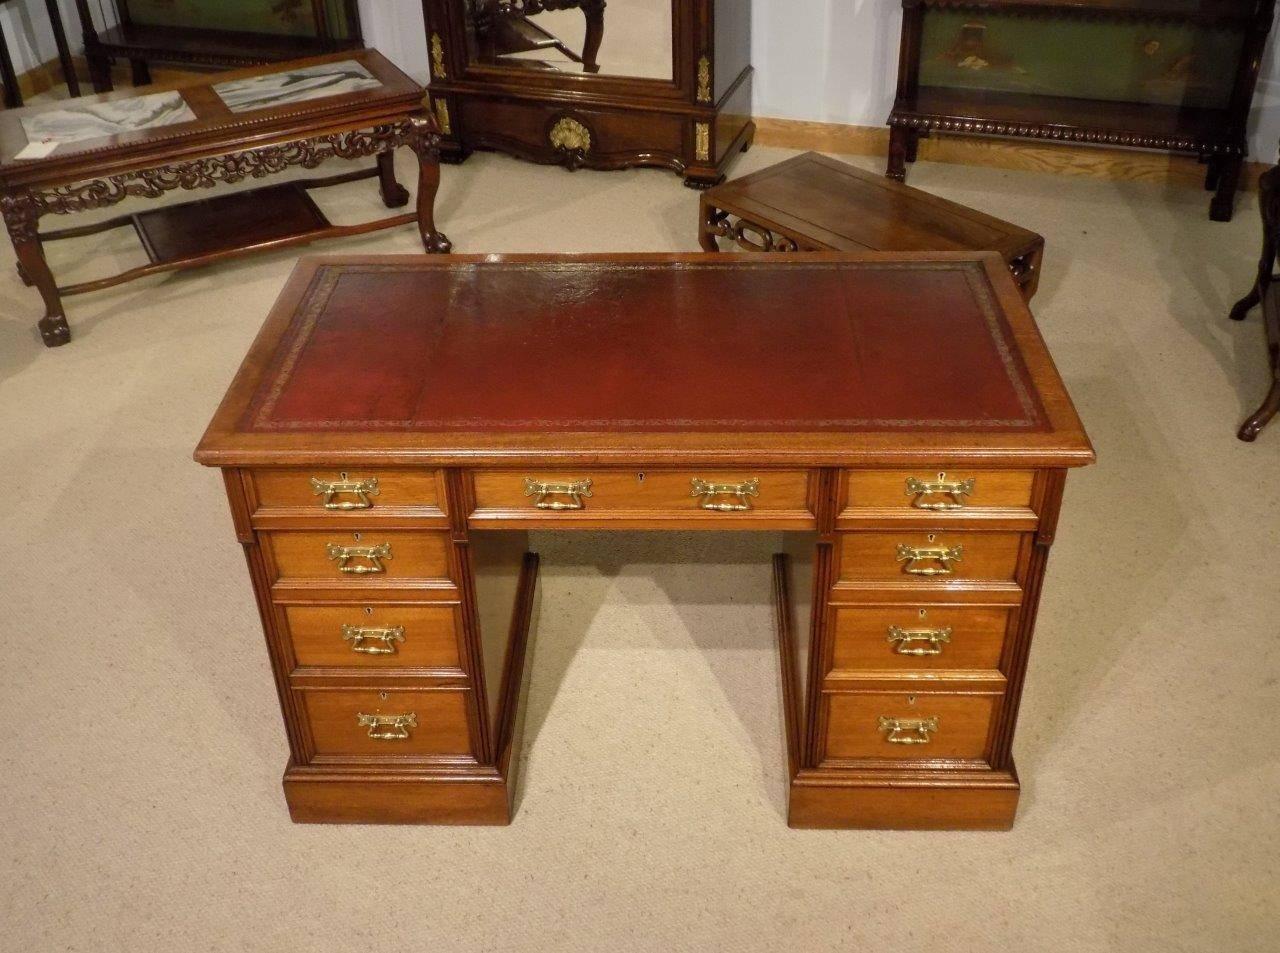 A mahogany Late Victorian Period antique pedestal desk by Hindley & Sons of London. Having a rectangular solid mahogany top with an inset rouge leather writing surface with blind and gilt tooled detail and a moulded edge. With an arrangement of